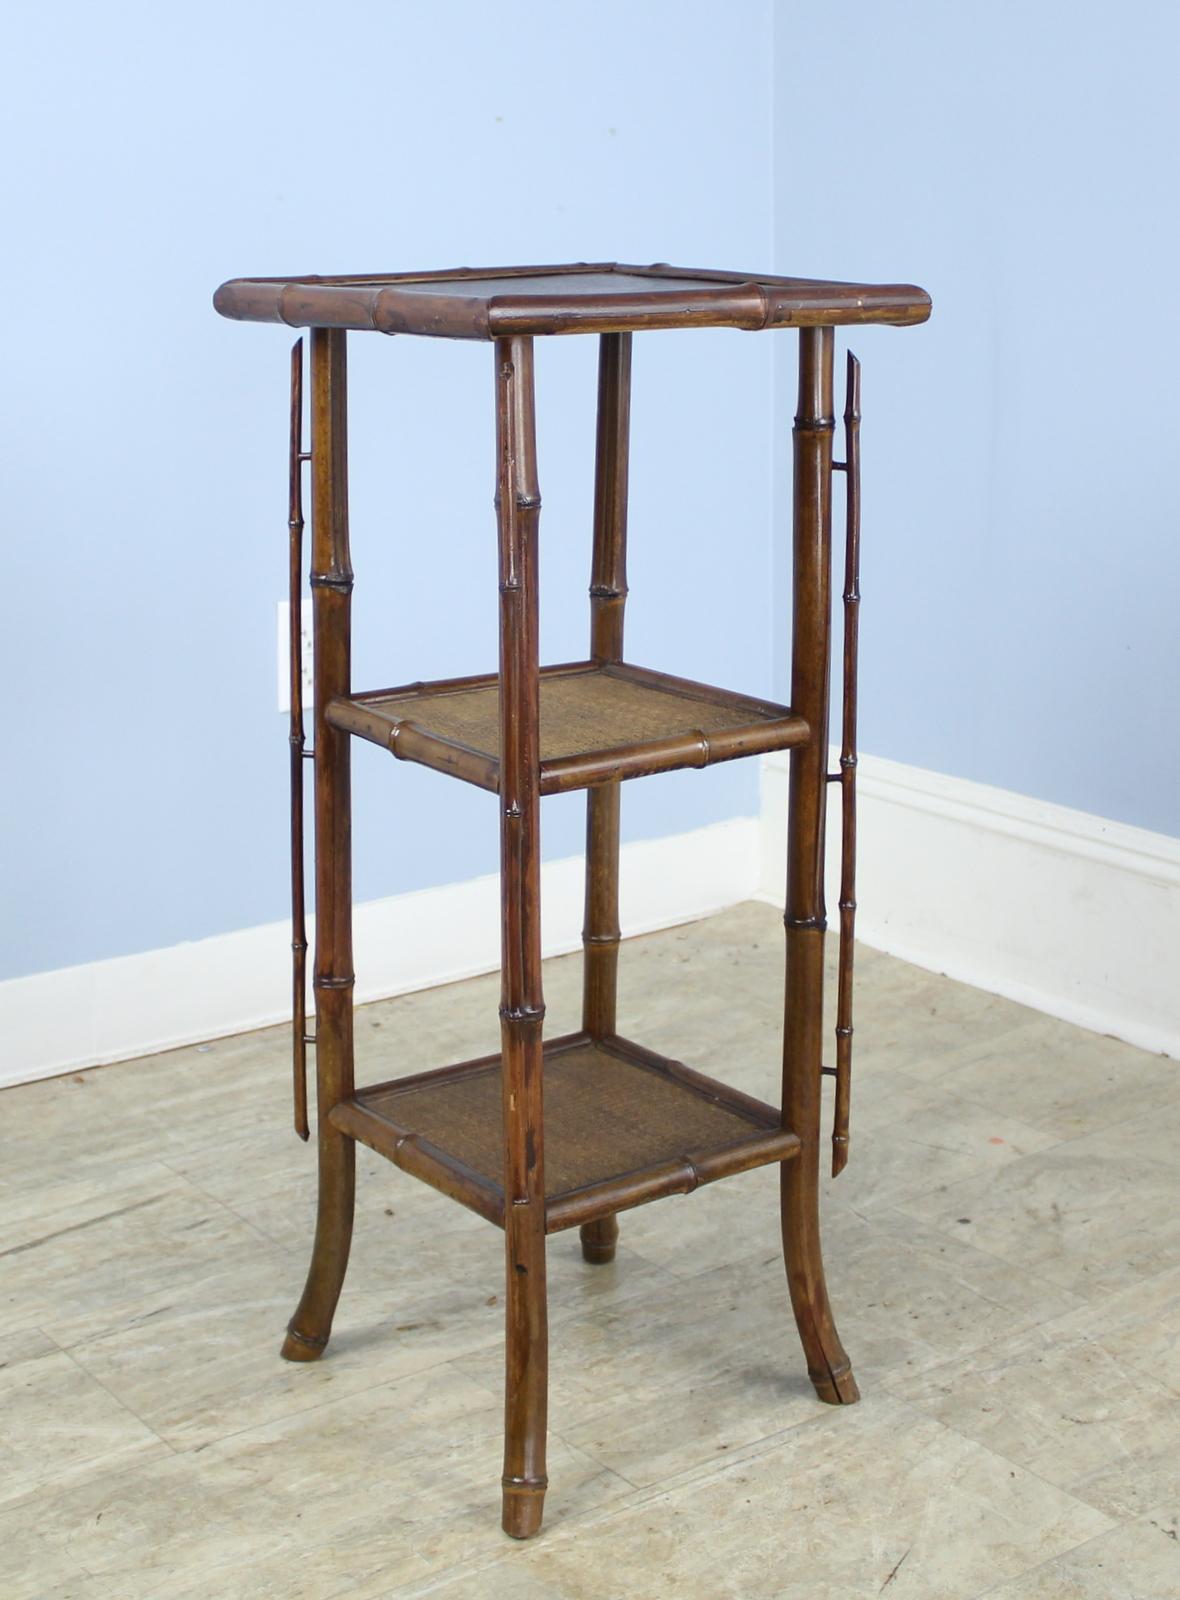 An antique English bamboo side table, with flared legs accented with vertical detail and its original leather top,. The two bottom shelves are made of tightly woven rattan that is in very good condition. The top has a stylish leather surface. The